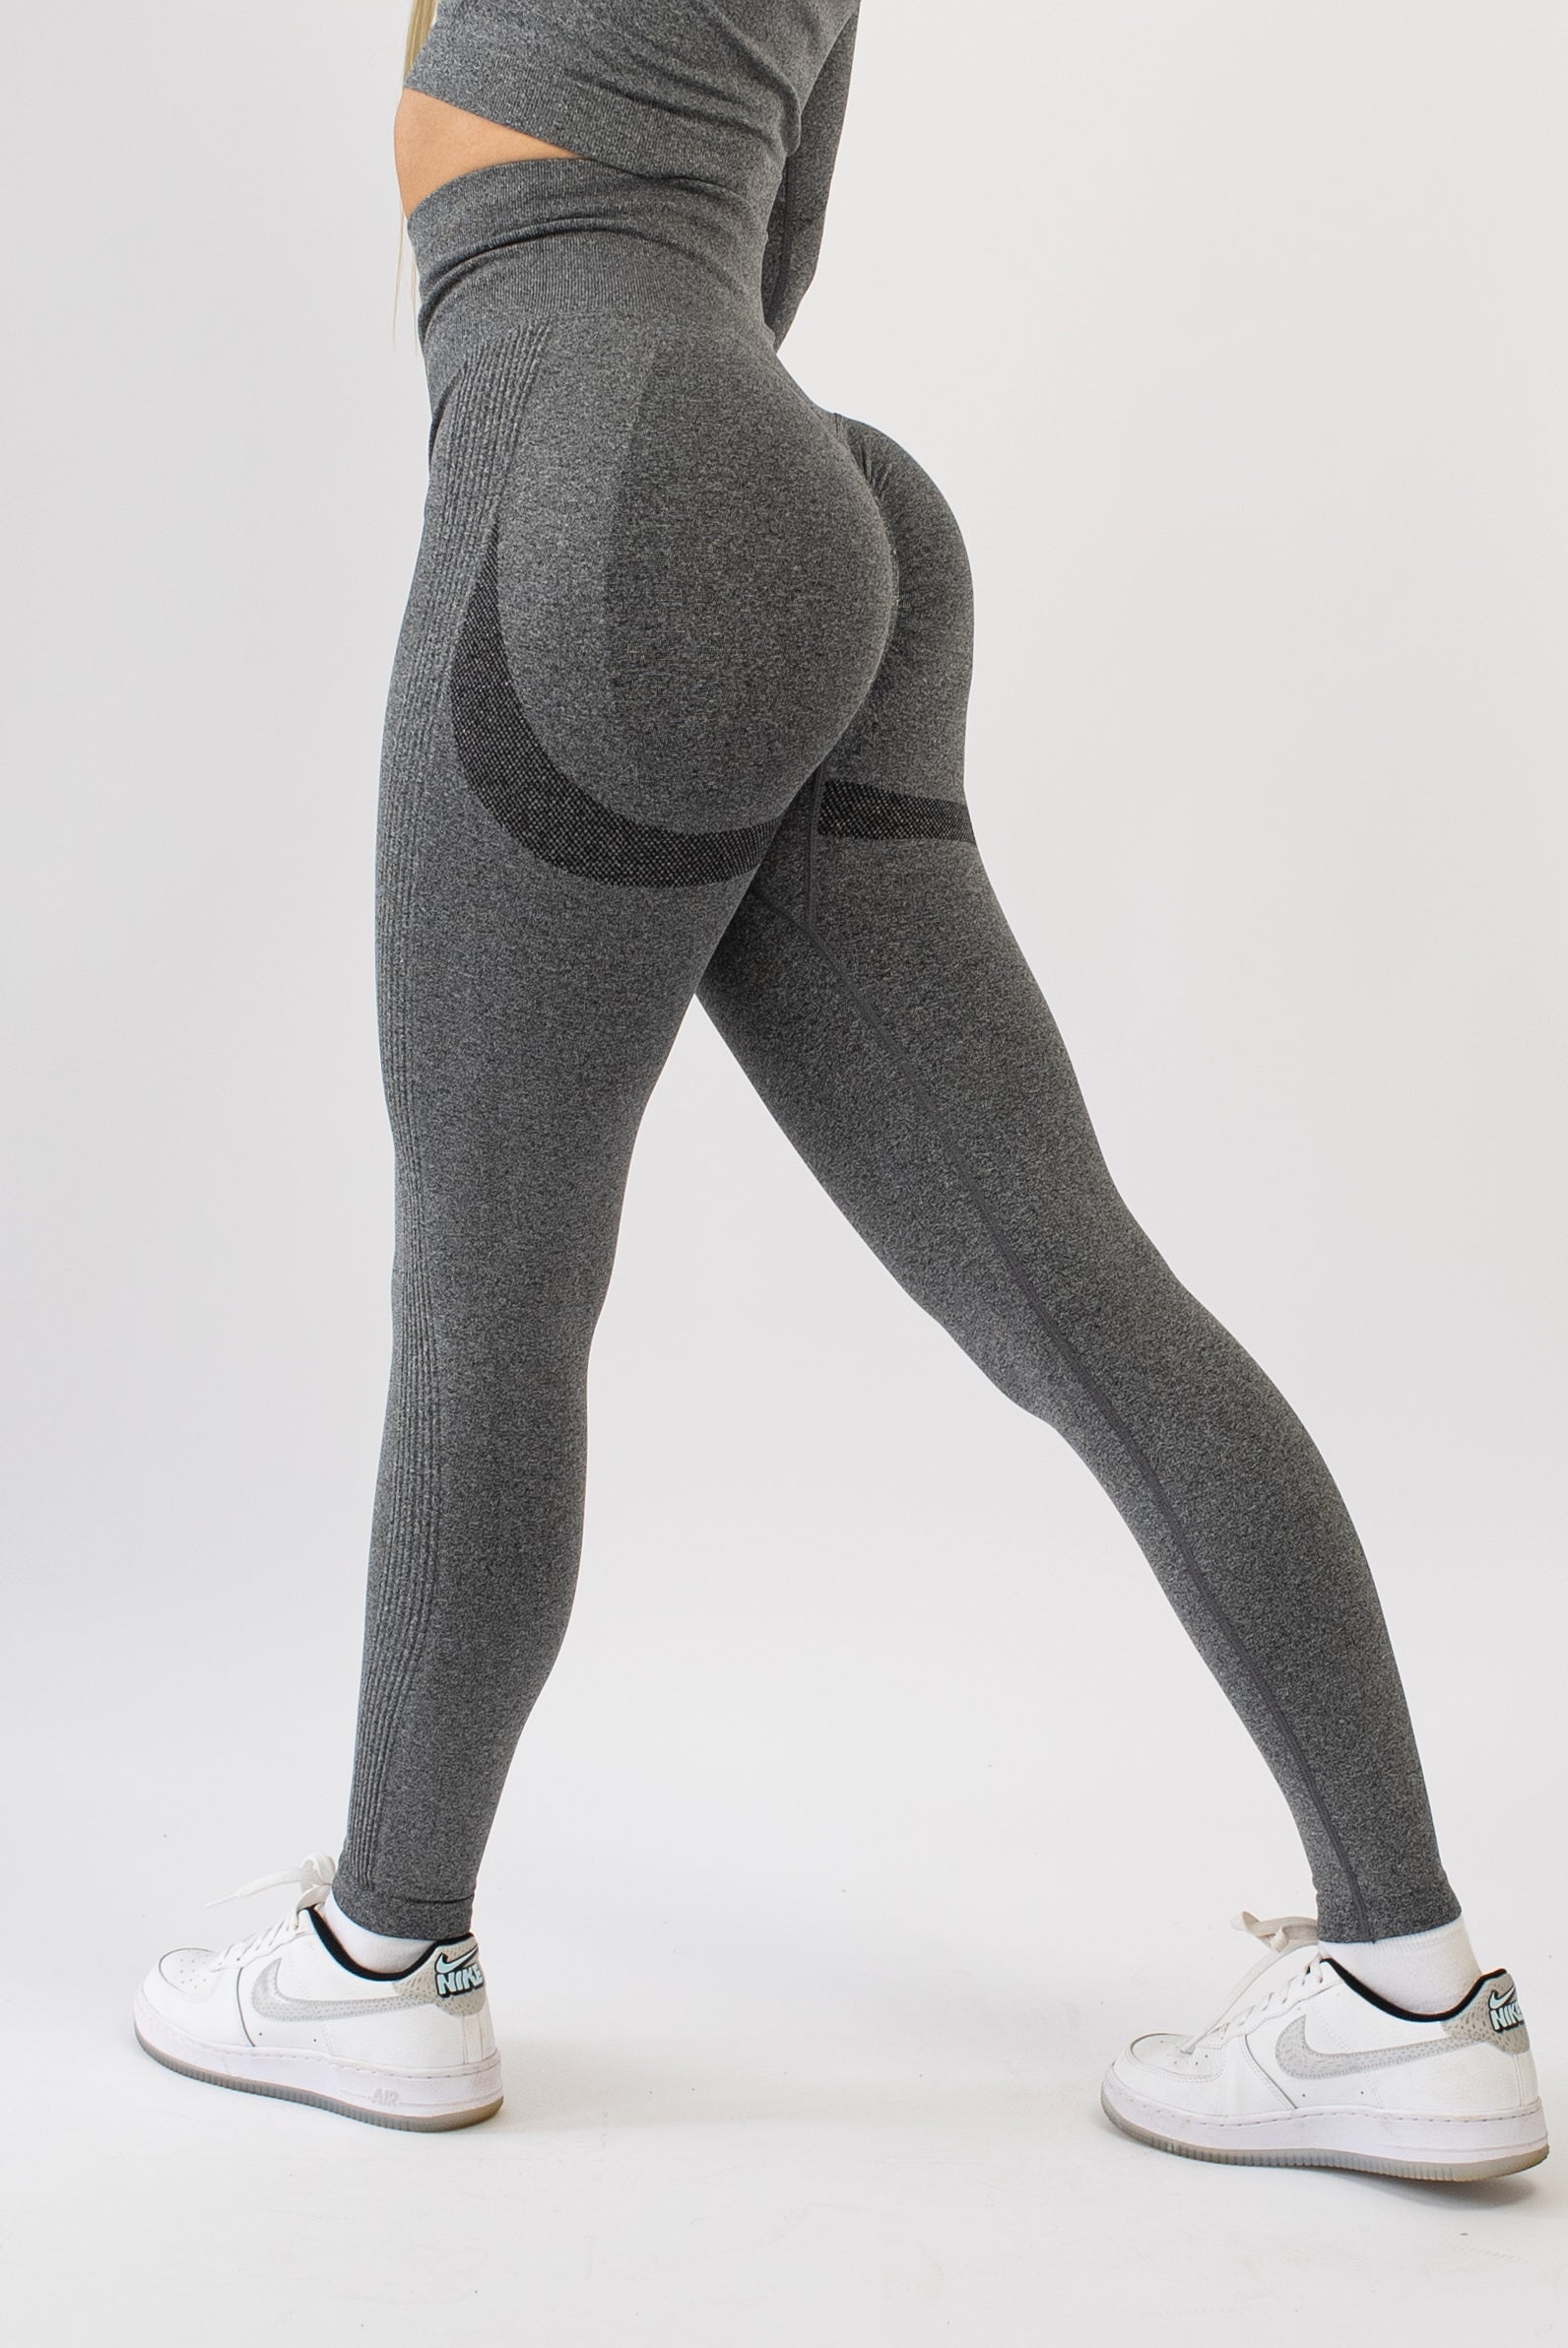 Charcoal Scrunch Leggings High Waisted and Booty Enhancing - House